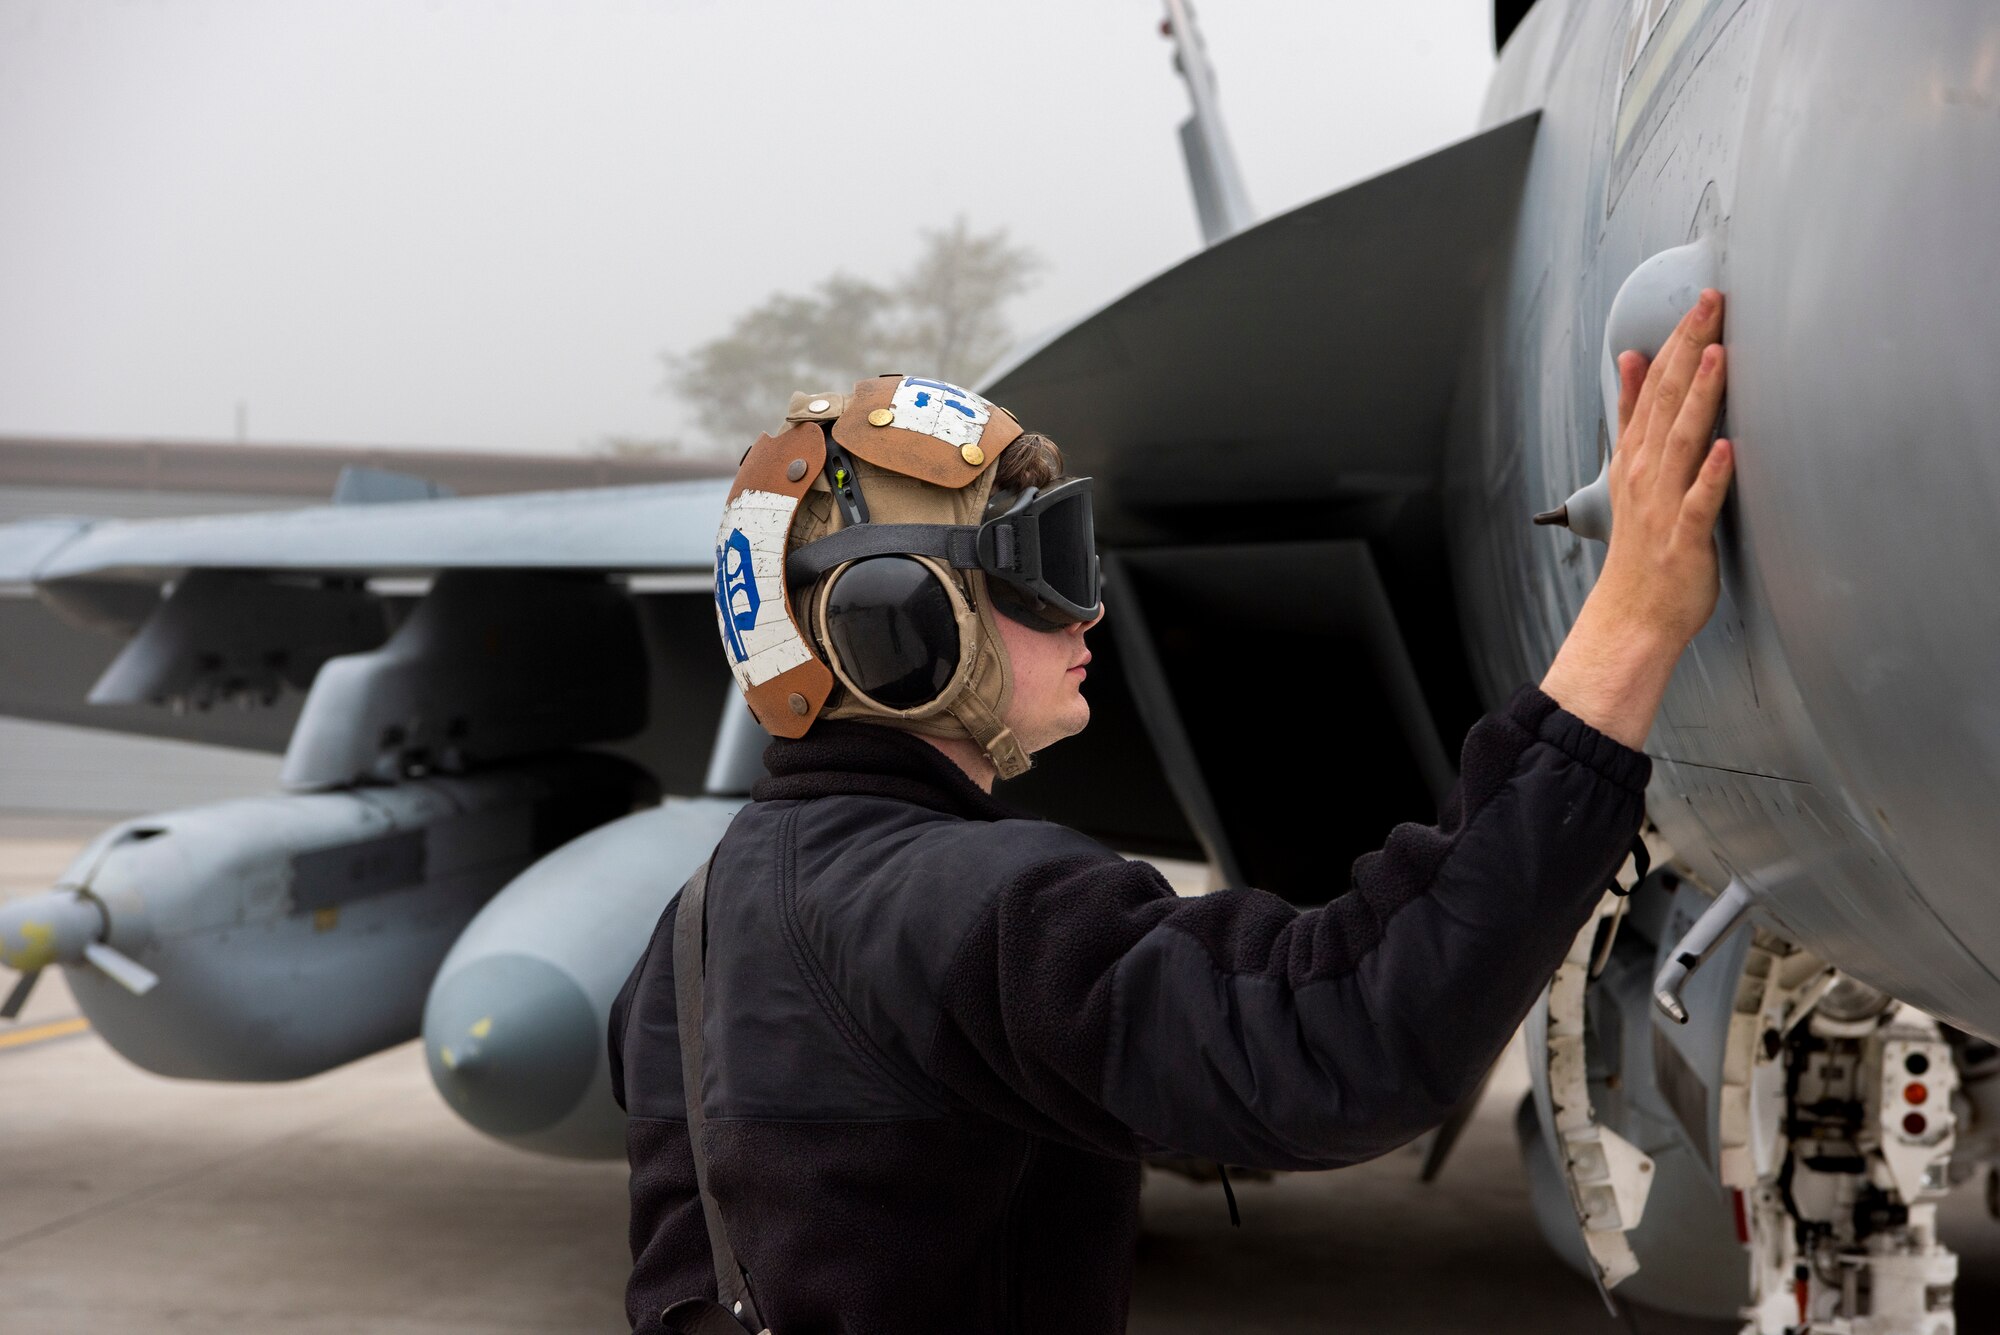 U.S. Navy Petty Officer 3rd Class Robert Bolton, aviation electronics technician assigned to Electronic Attack Squadron (VAQ) 131 at Naval Air Station Whidbey Island, Washington, inspects an EA-18G Growler during Vigilant Storm 23 at Osan Air Base, Republic of Korea, Nov. 1, 2022.